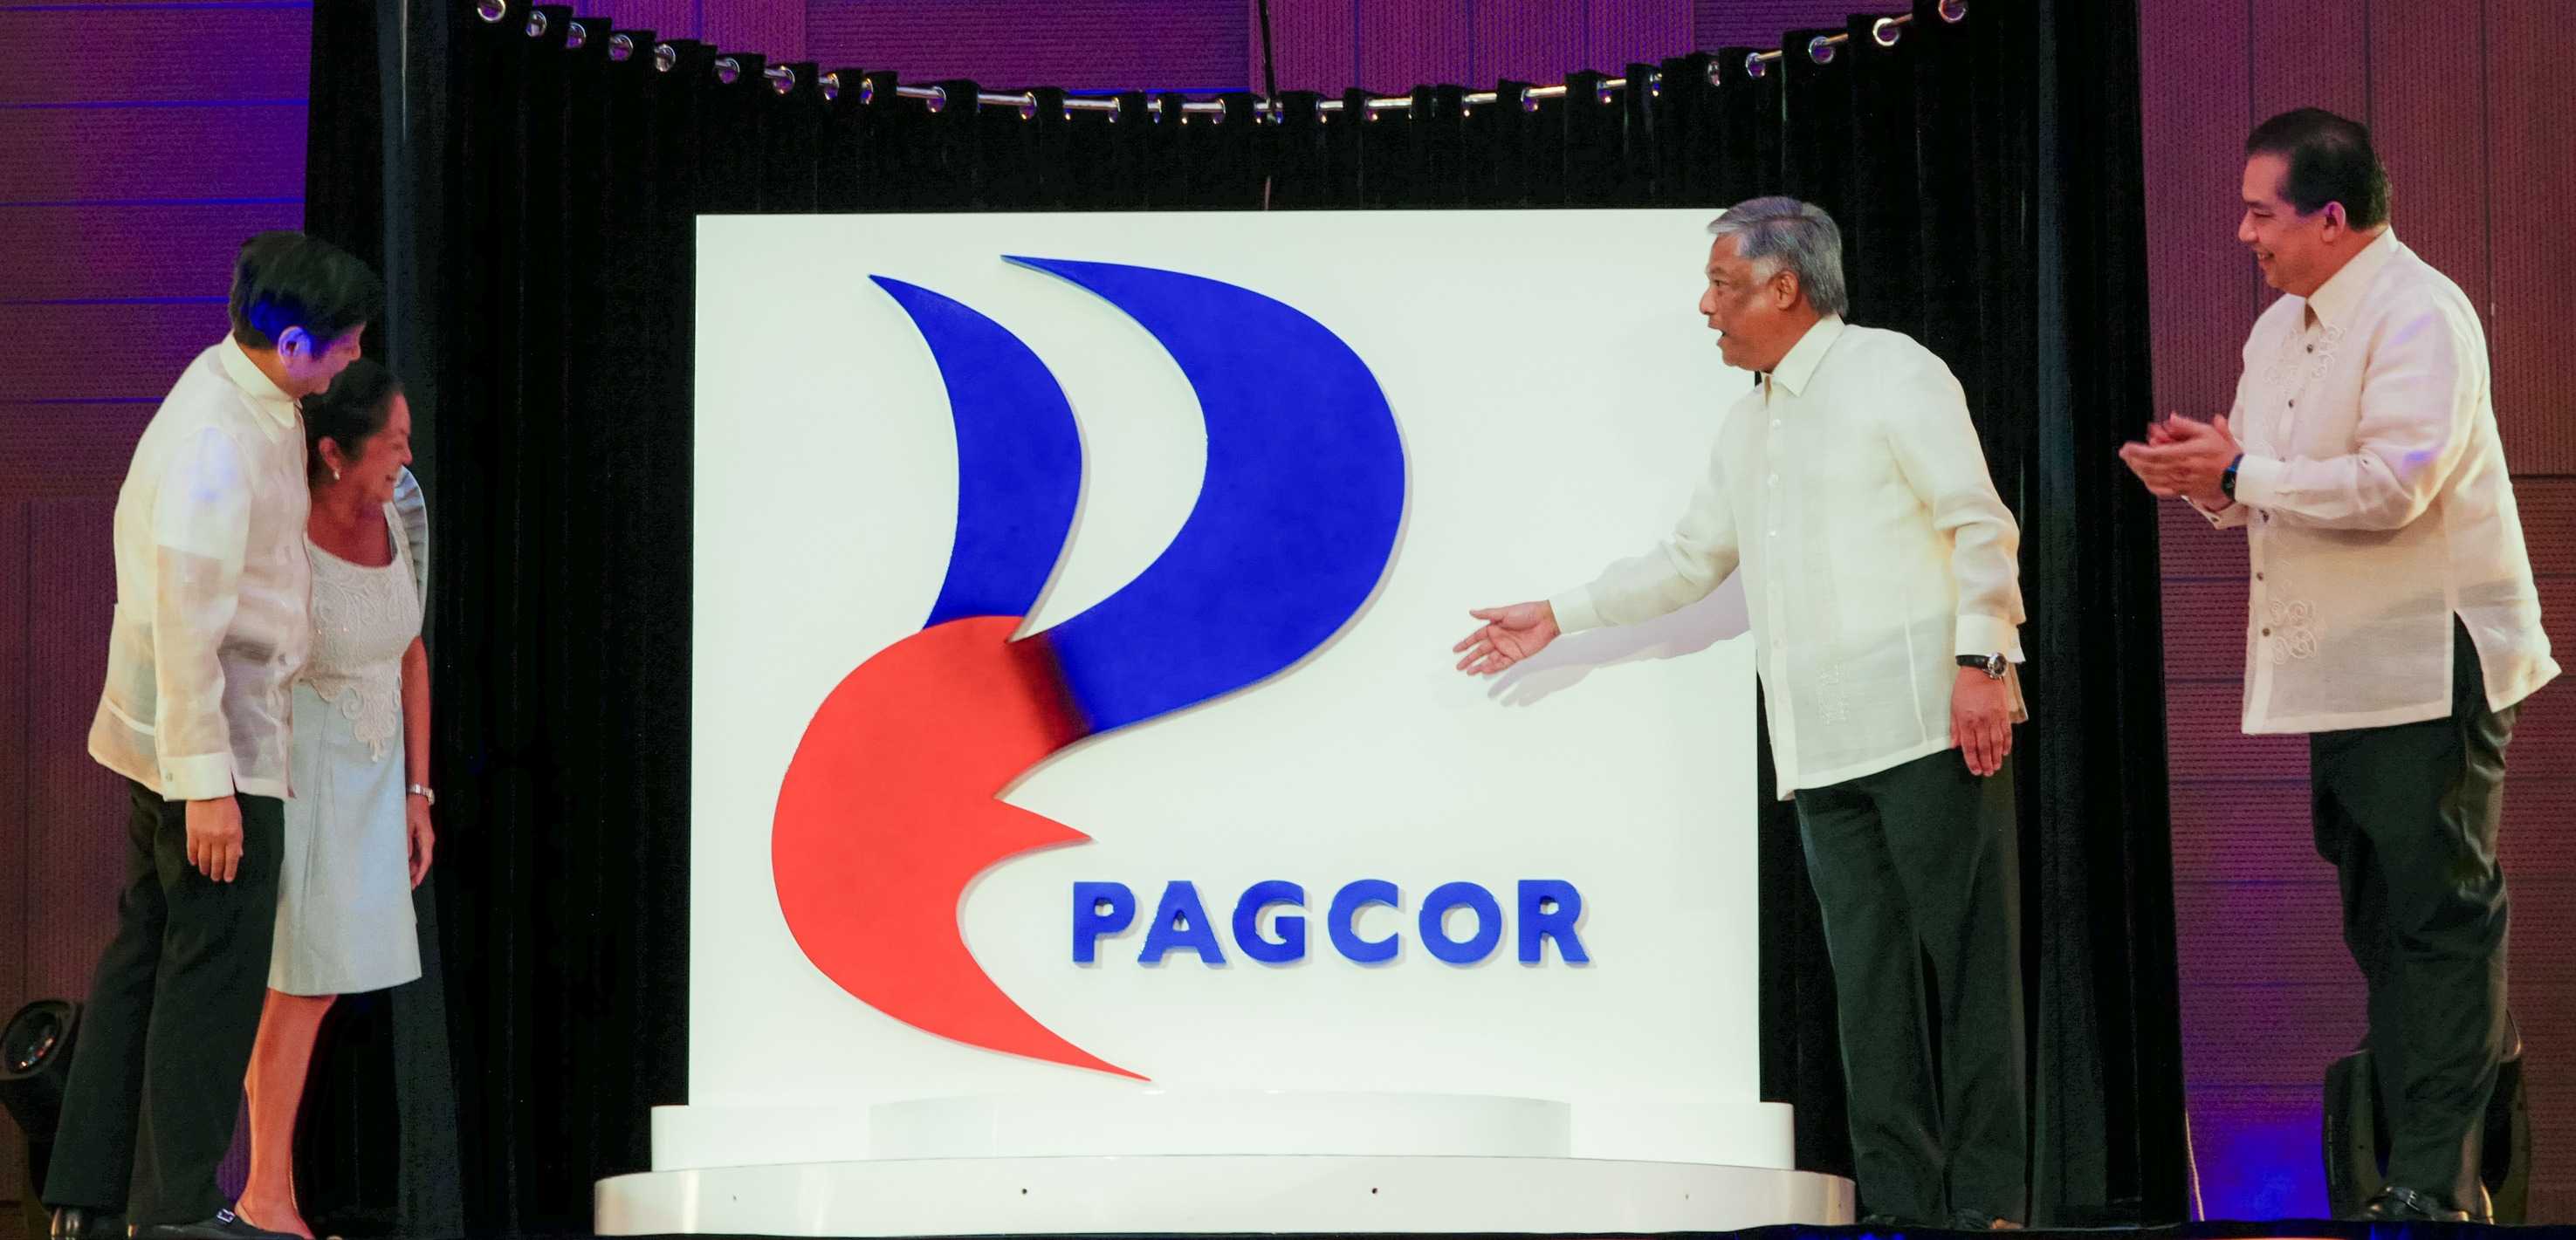 PAGCOR launches new logo as part of 40th anniv celebration